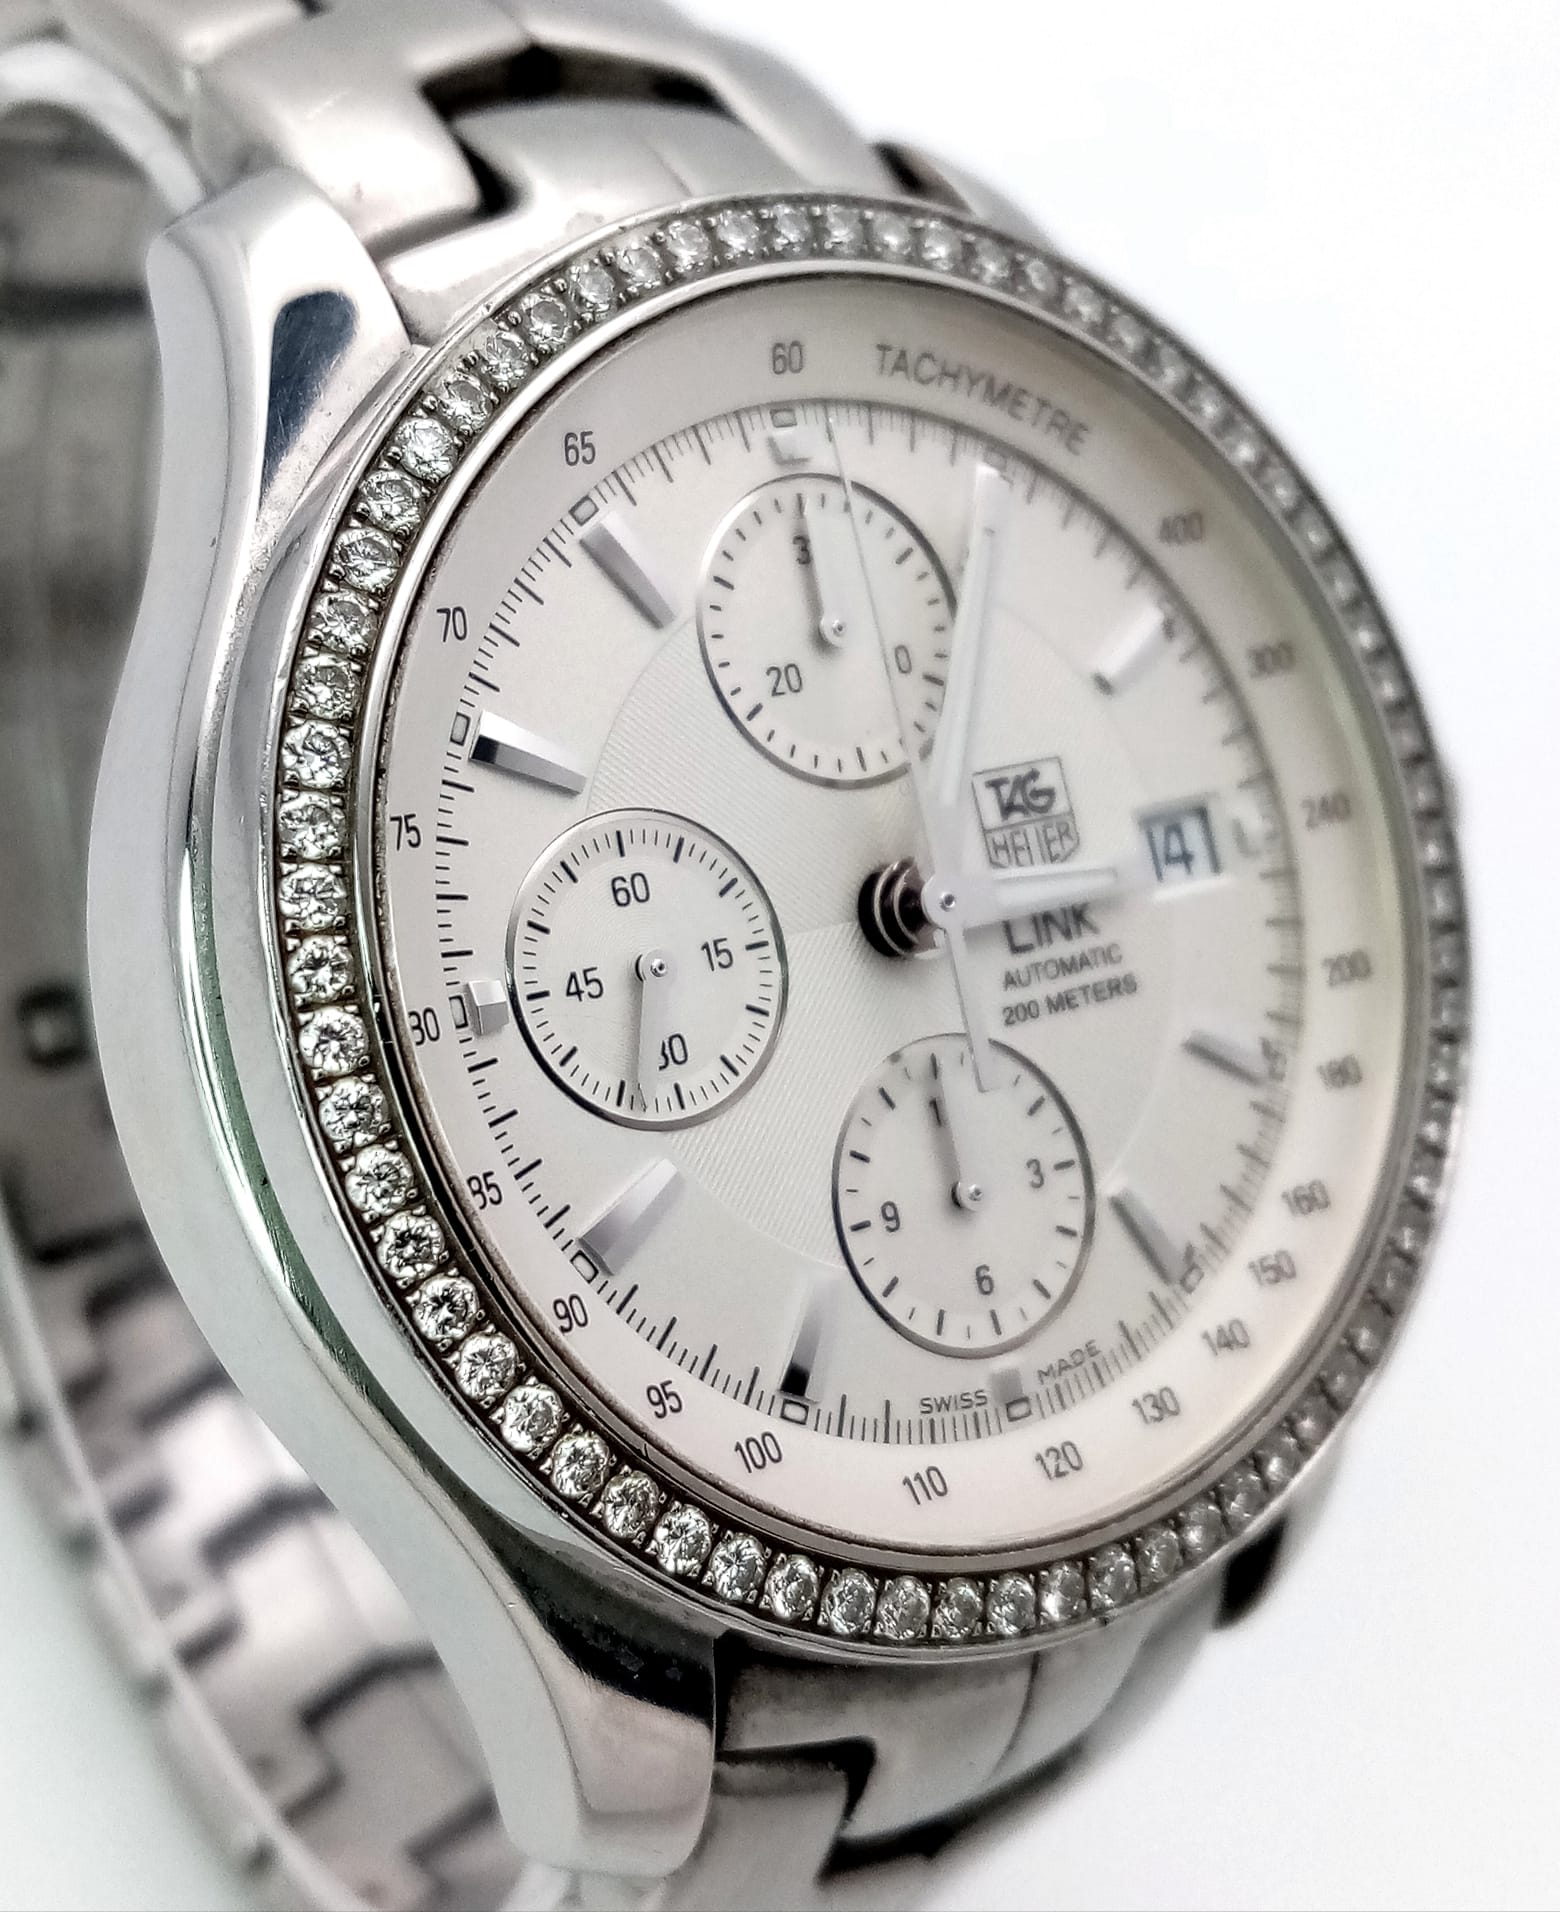 A gents TAG HEUER - LINK automatic watch with diamond set bezel. Stainless steel construction, 42 mm - Image 11 of 12